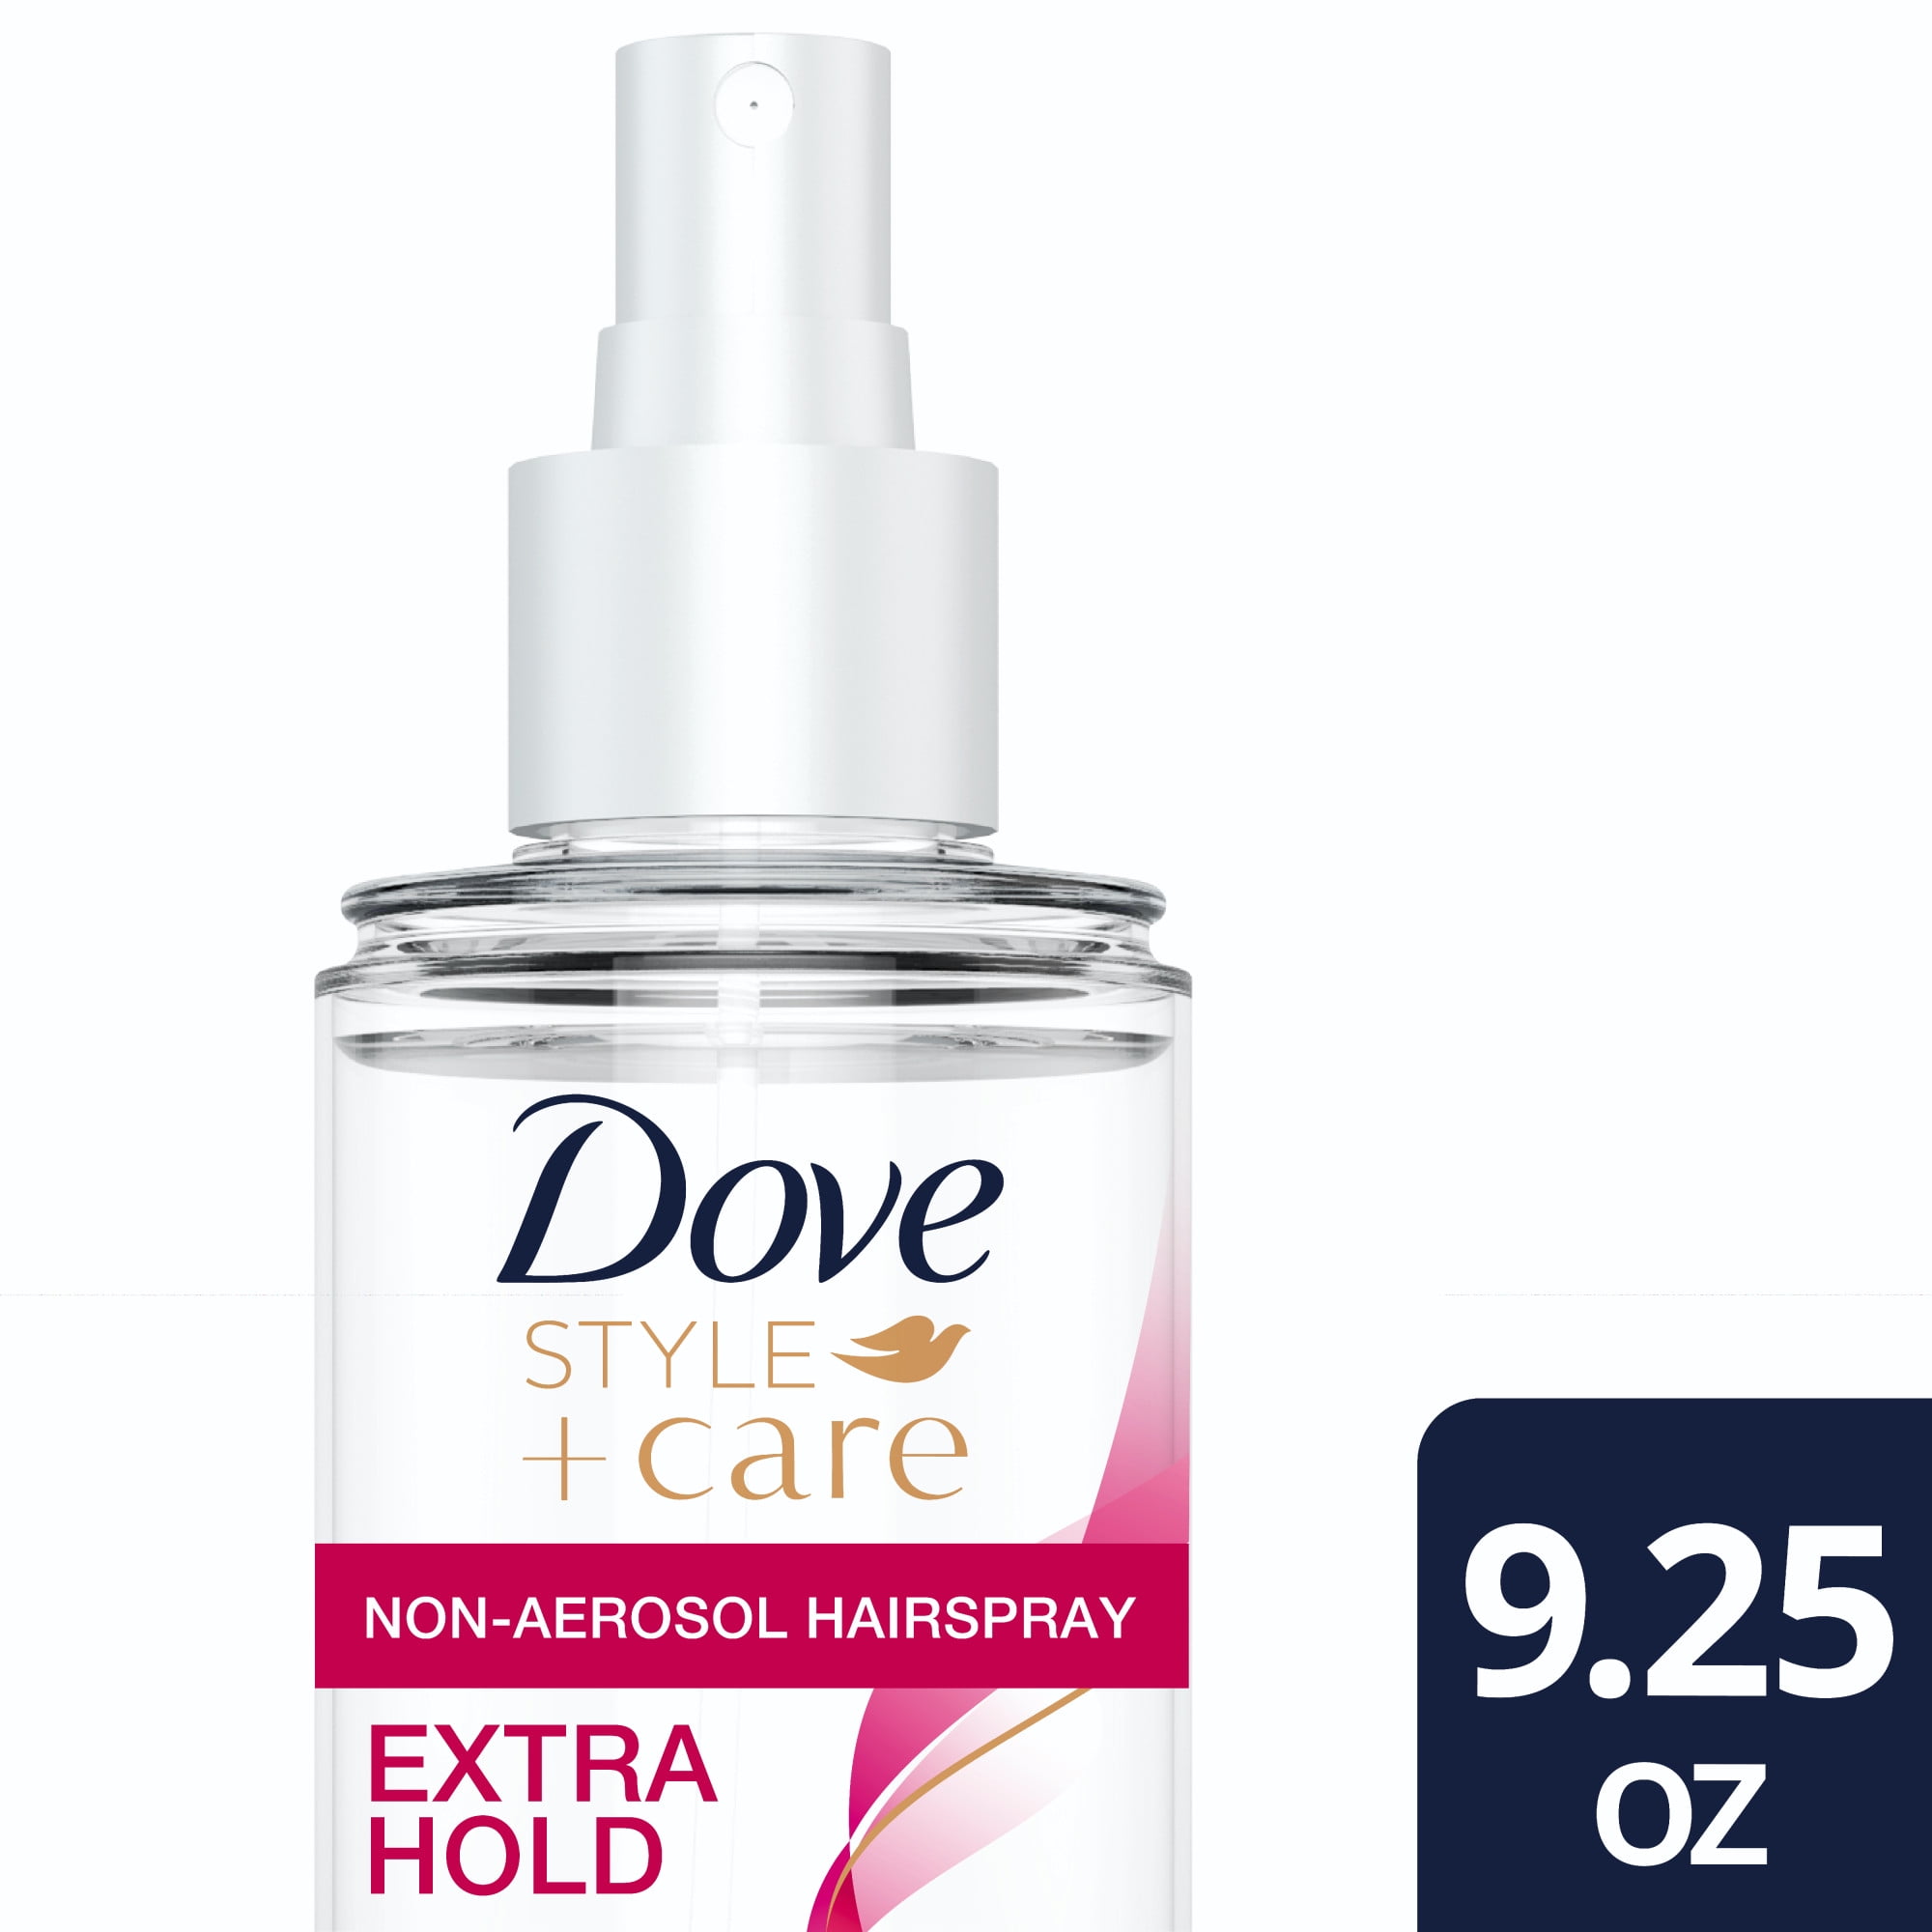 Dove Style+Care Extra Hold Hairspray , 9.25 oz